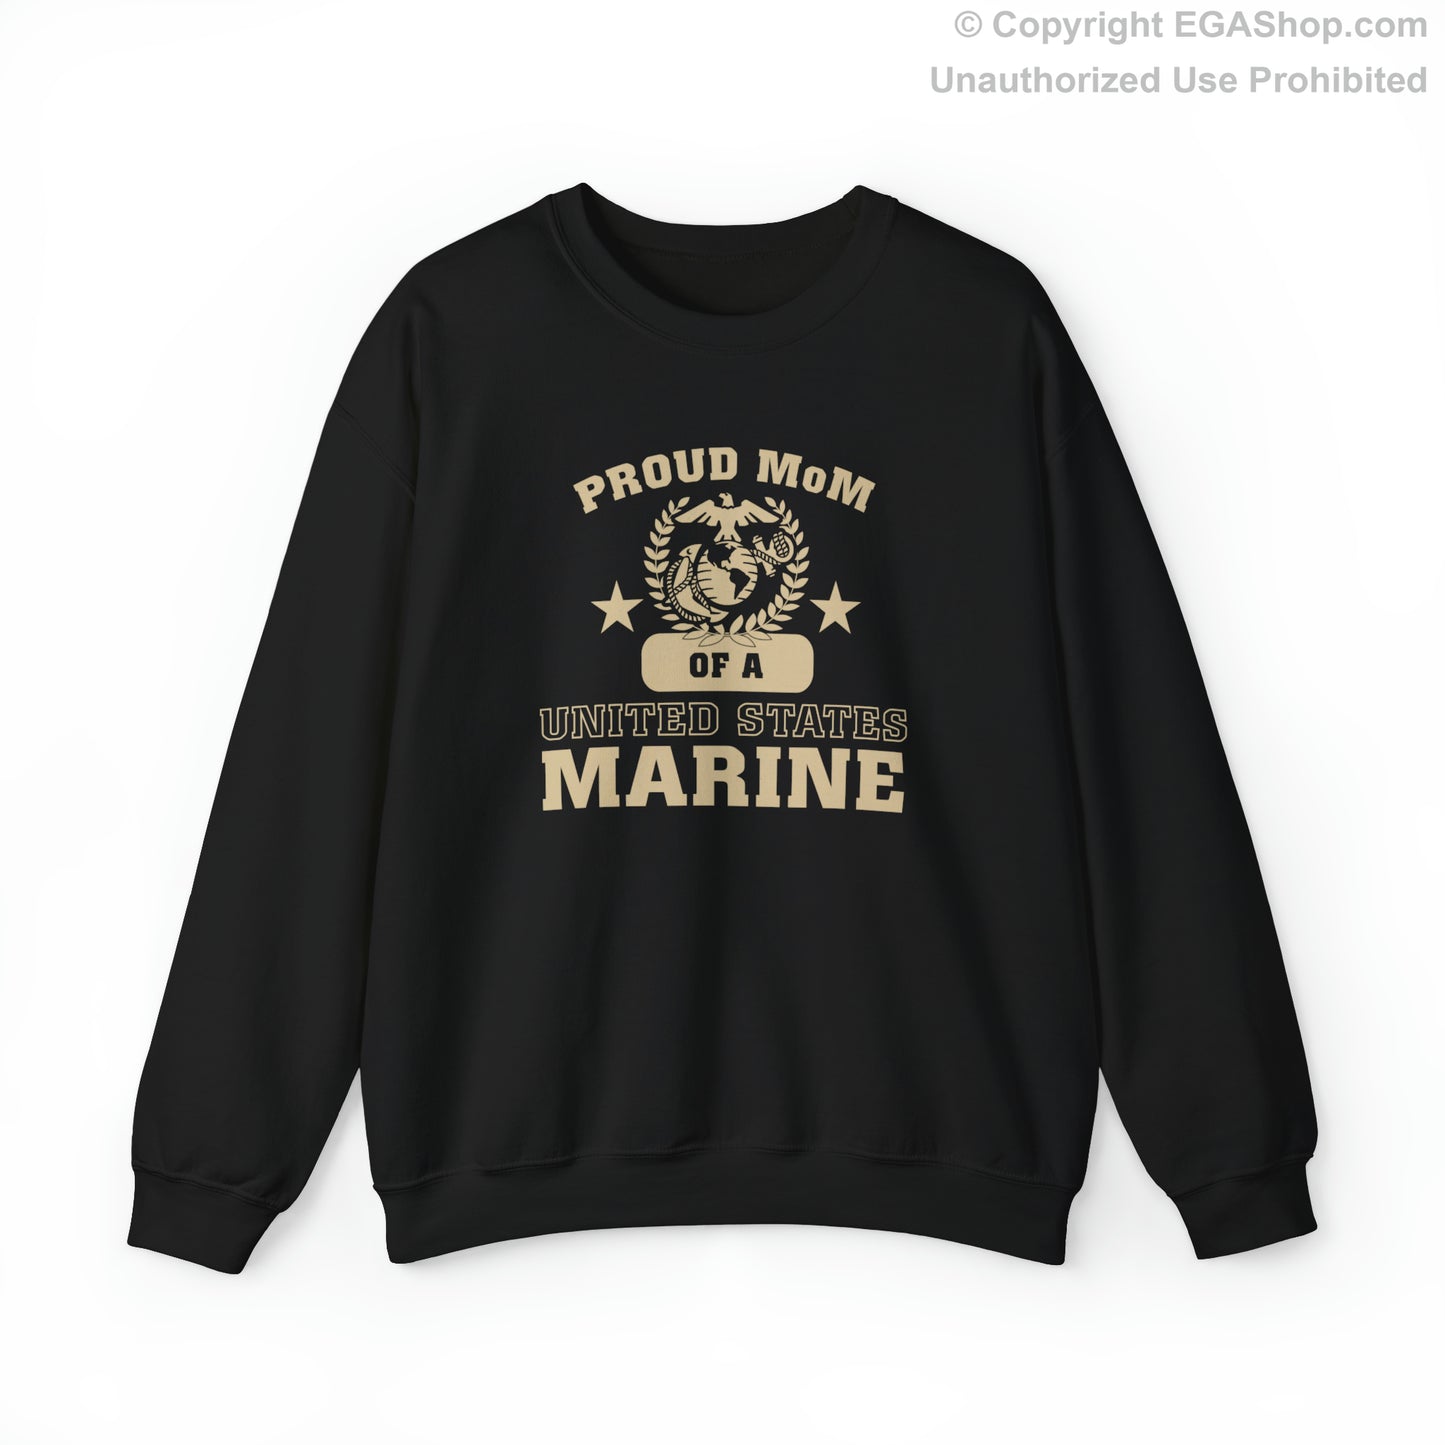 Sweatshirt: Proud MoM of a Marine (Varsity Style, Color Choices)